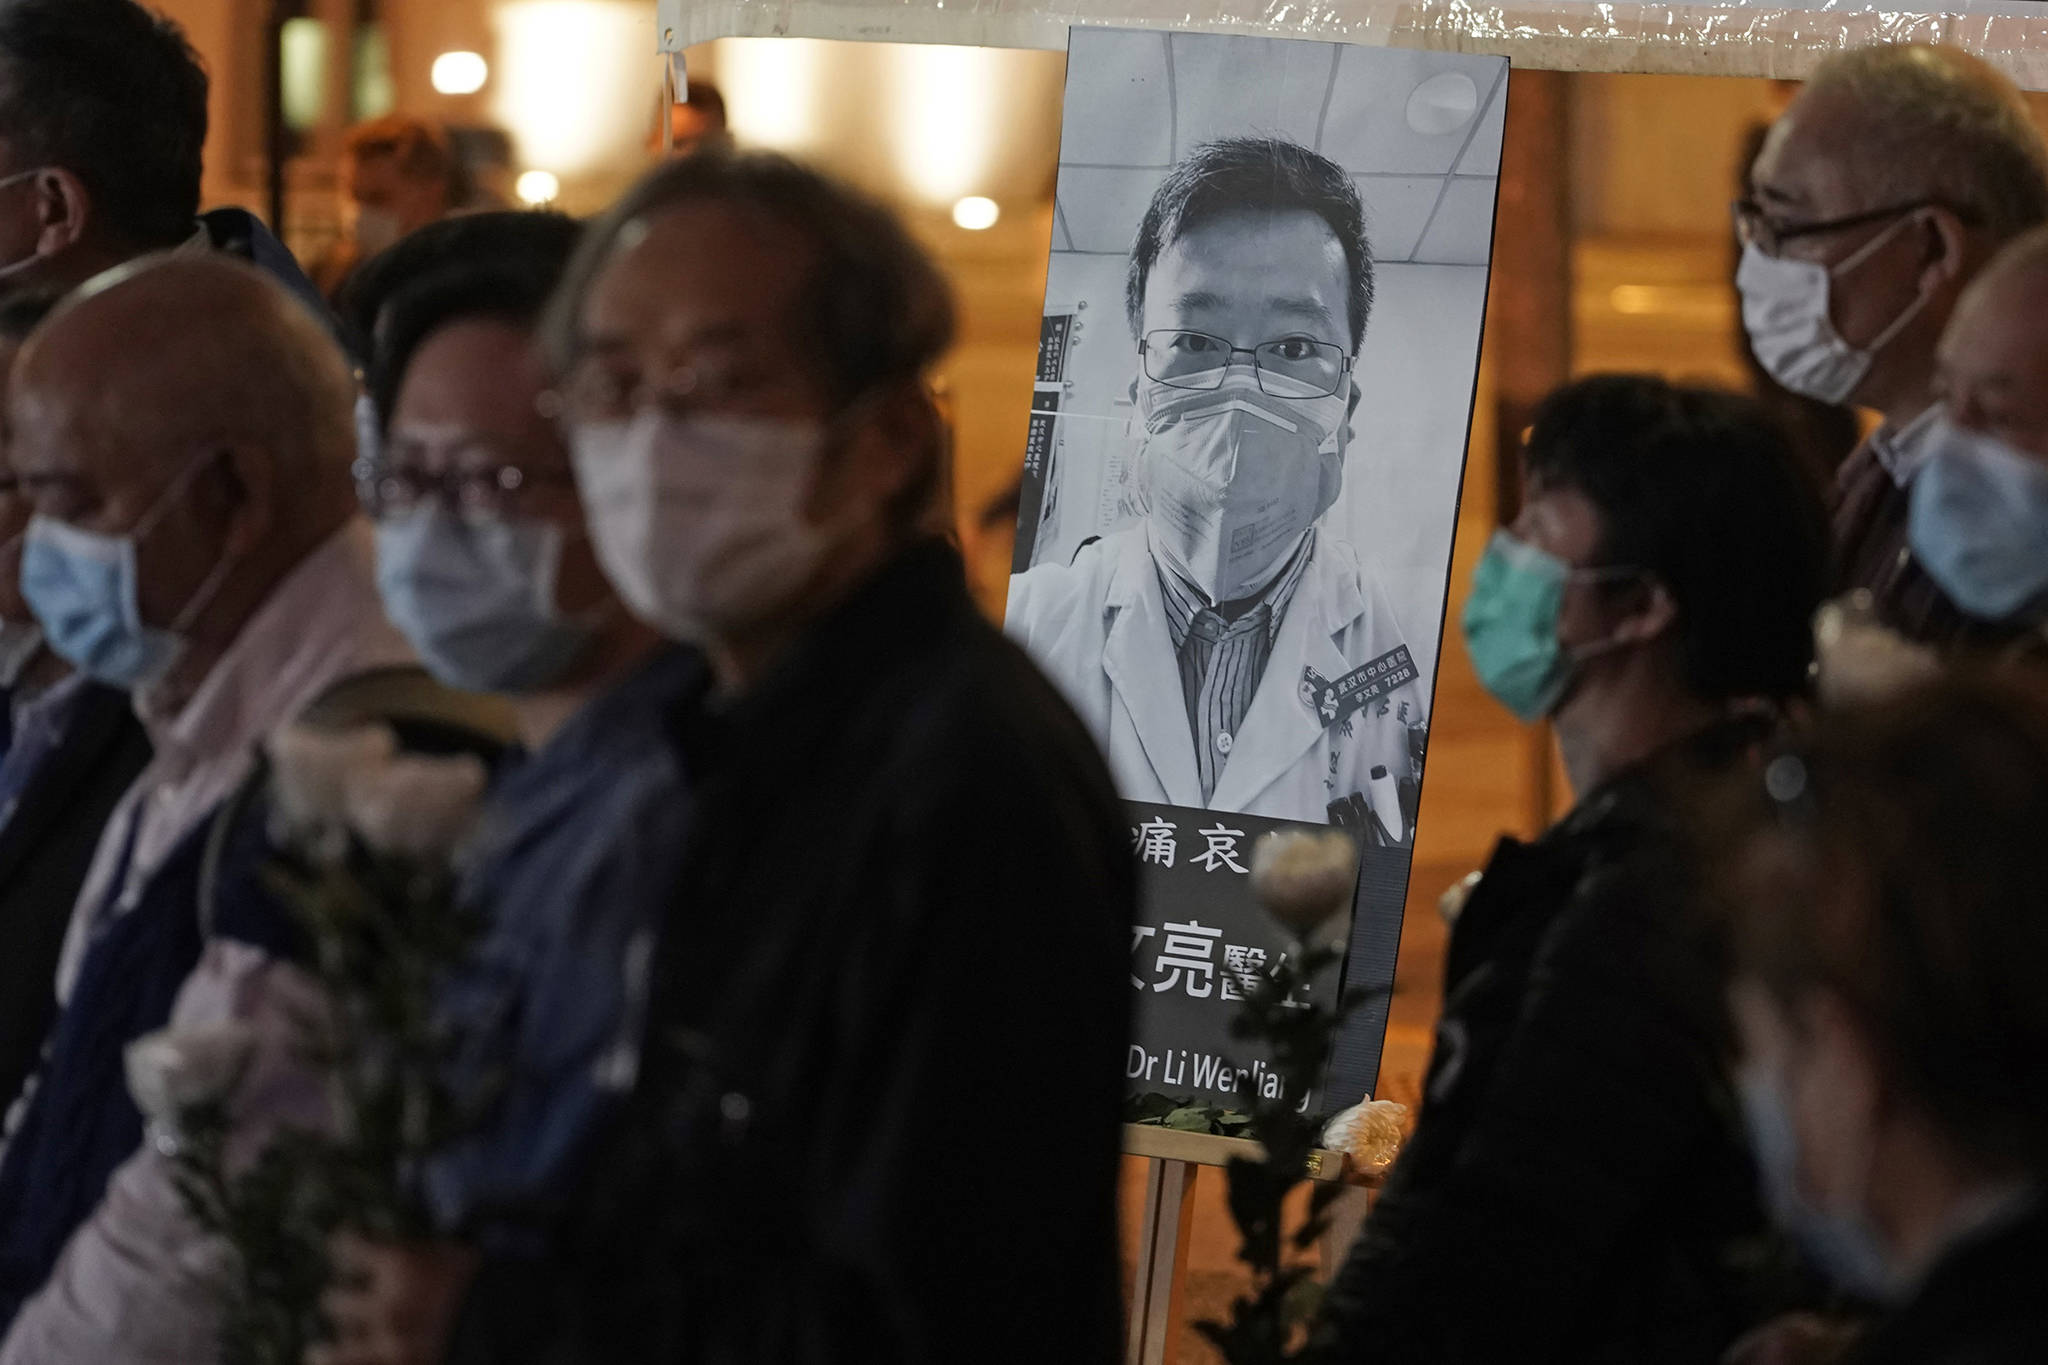 People wearing masks, attend a vigil for Chinese doctor Li Wenliang, in Hong Kong, Friday. The death of a young doctor who was reprimanded for warning about China’s new virus triggered an outpouring Friday of praise for him and fury that communist authorities put politics above public safety. (AP Photo | Kin Cheung)